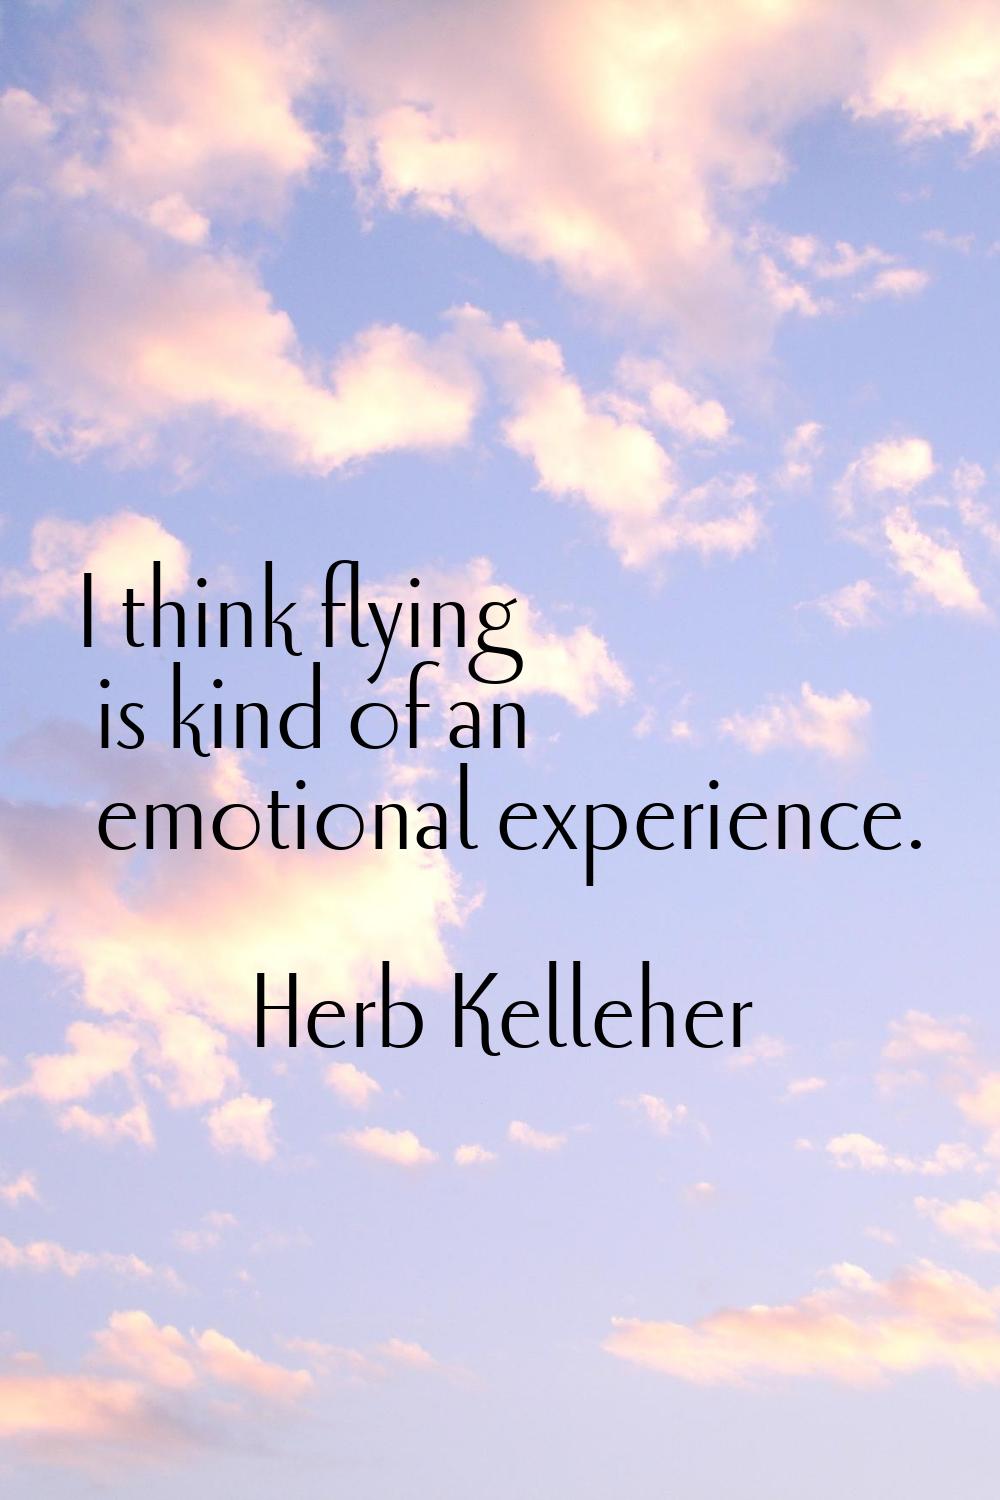 I think flying is kind of an emotional experience.